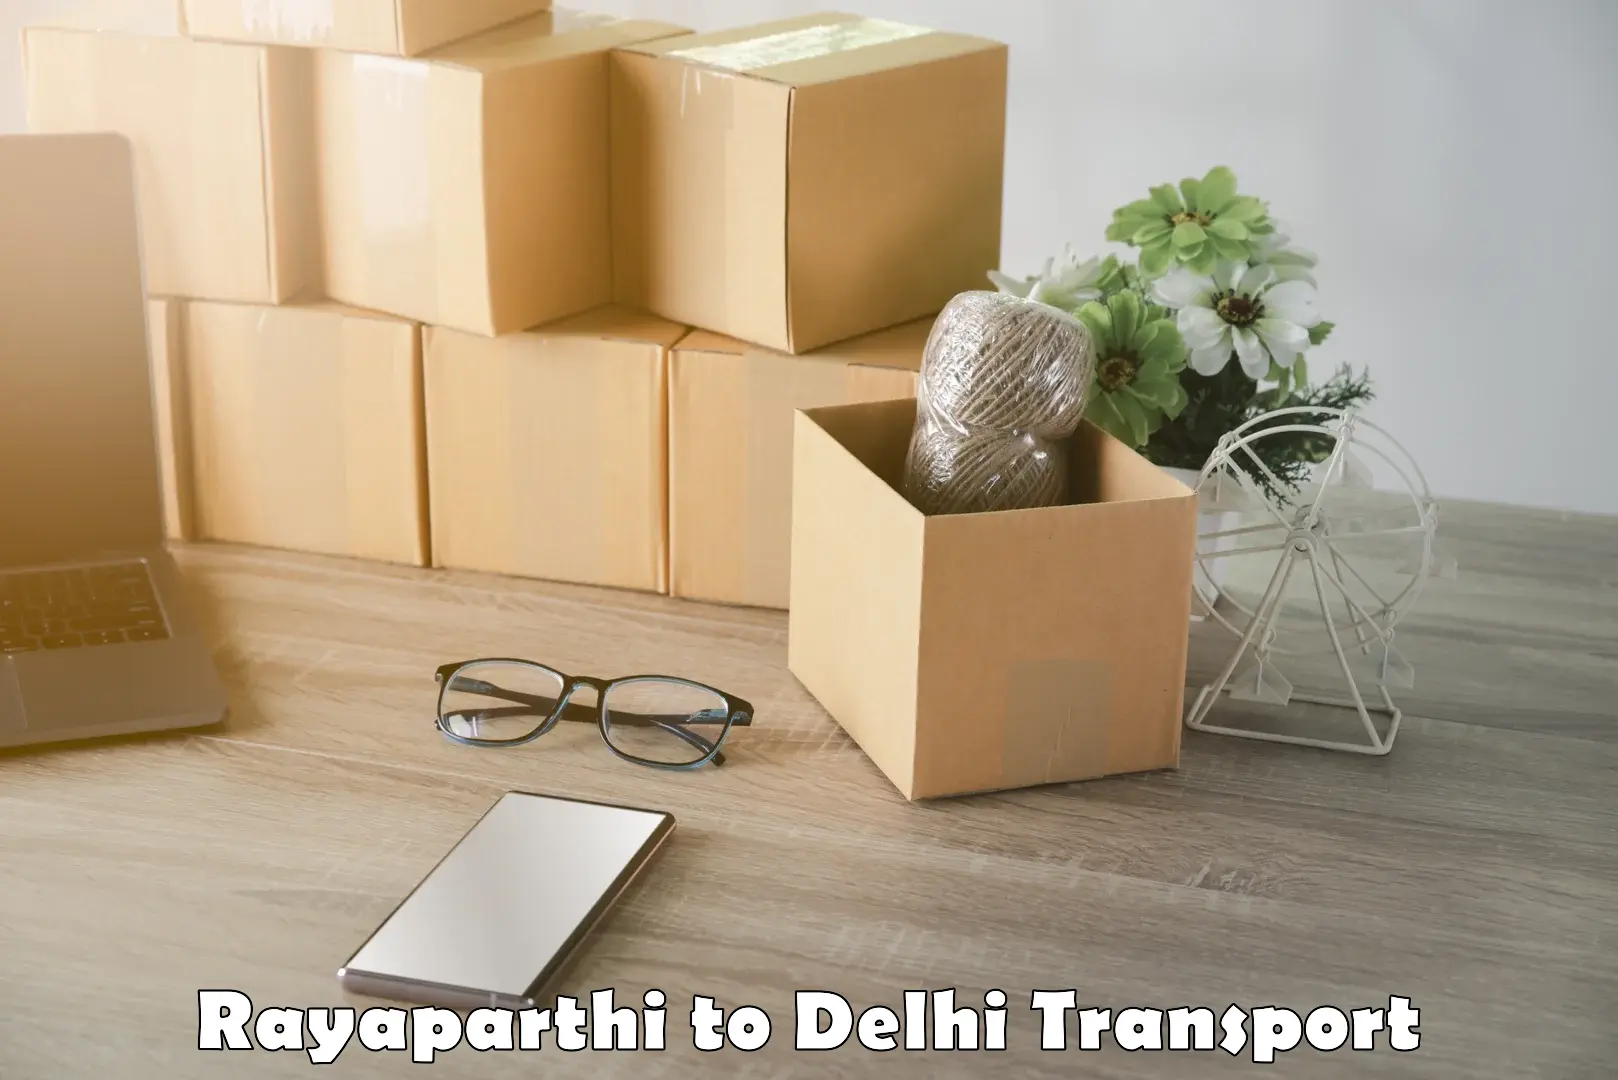 Domestic transport services Rayaparthi to NCR